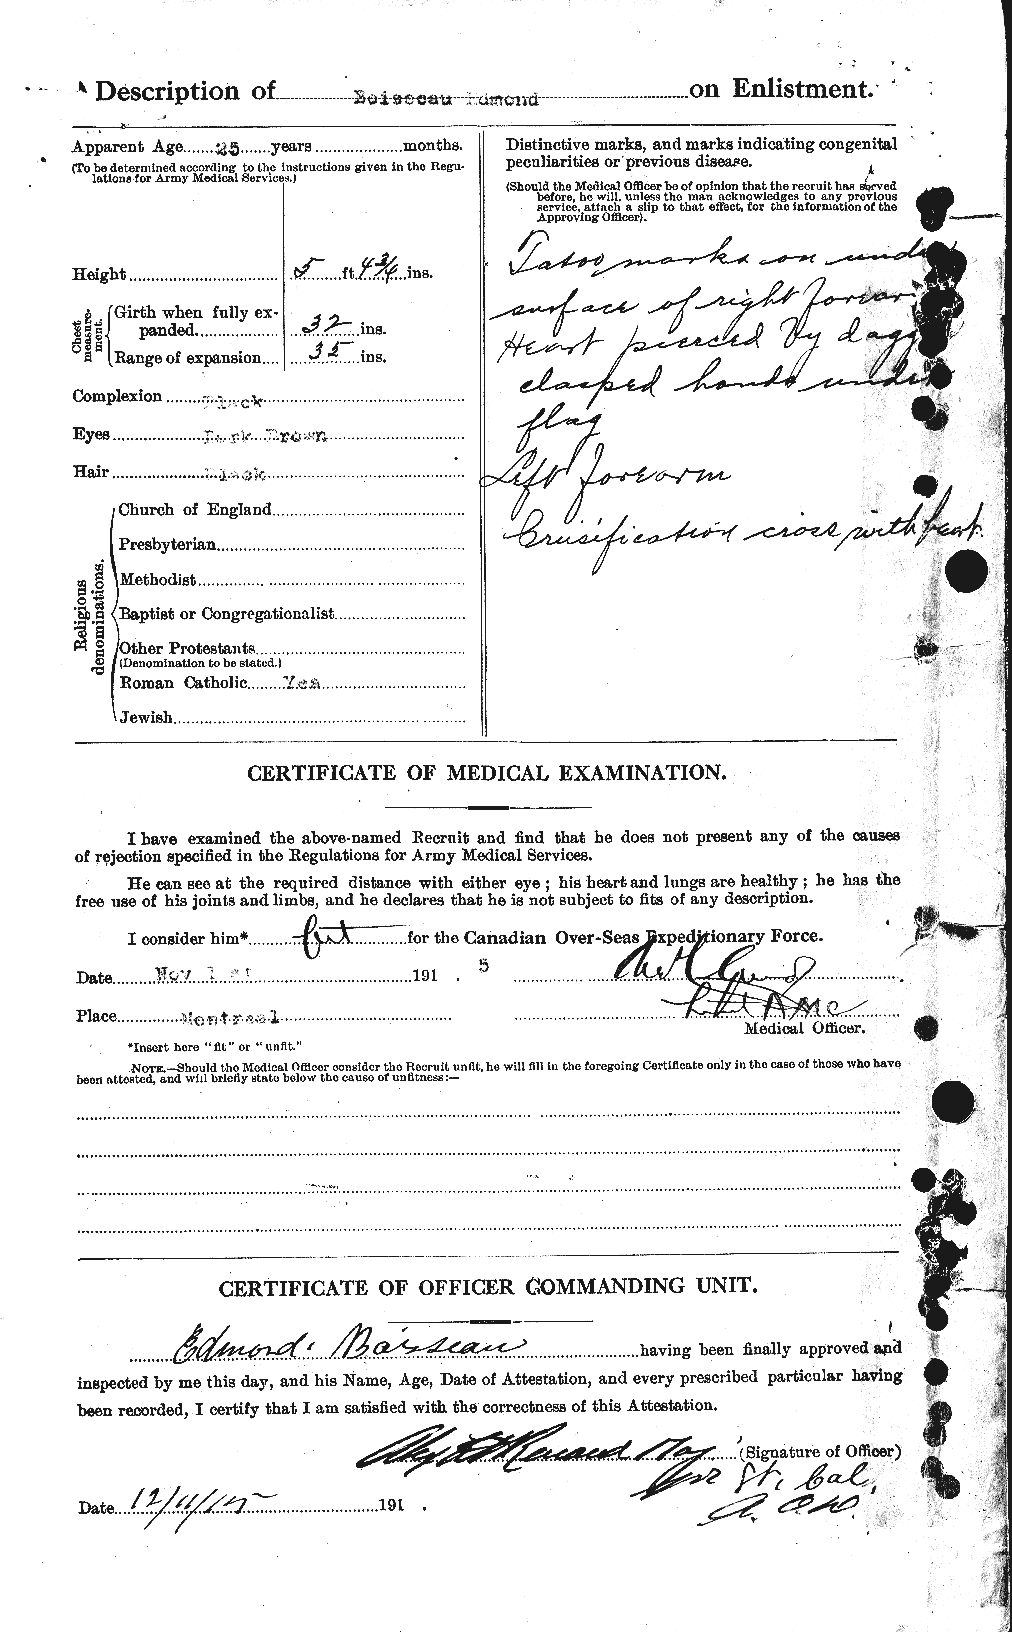 Personnel Records of the First World War - CEF 249435b